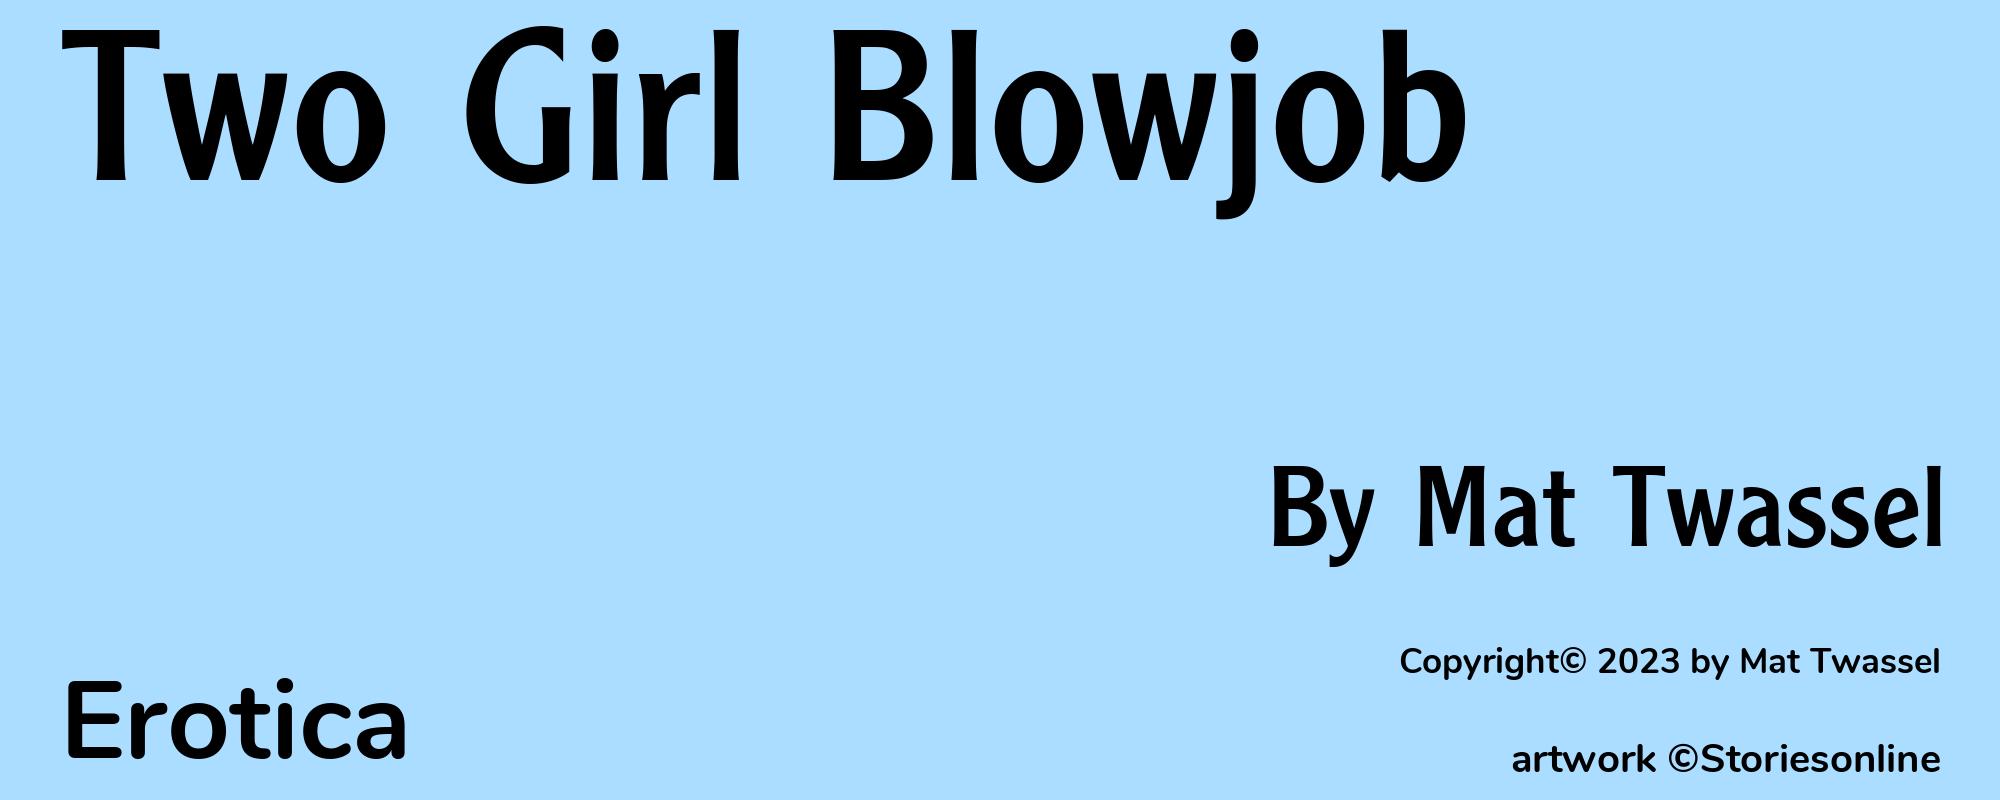 Two Girl Blowjob - Cover